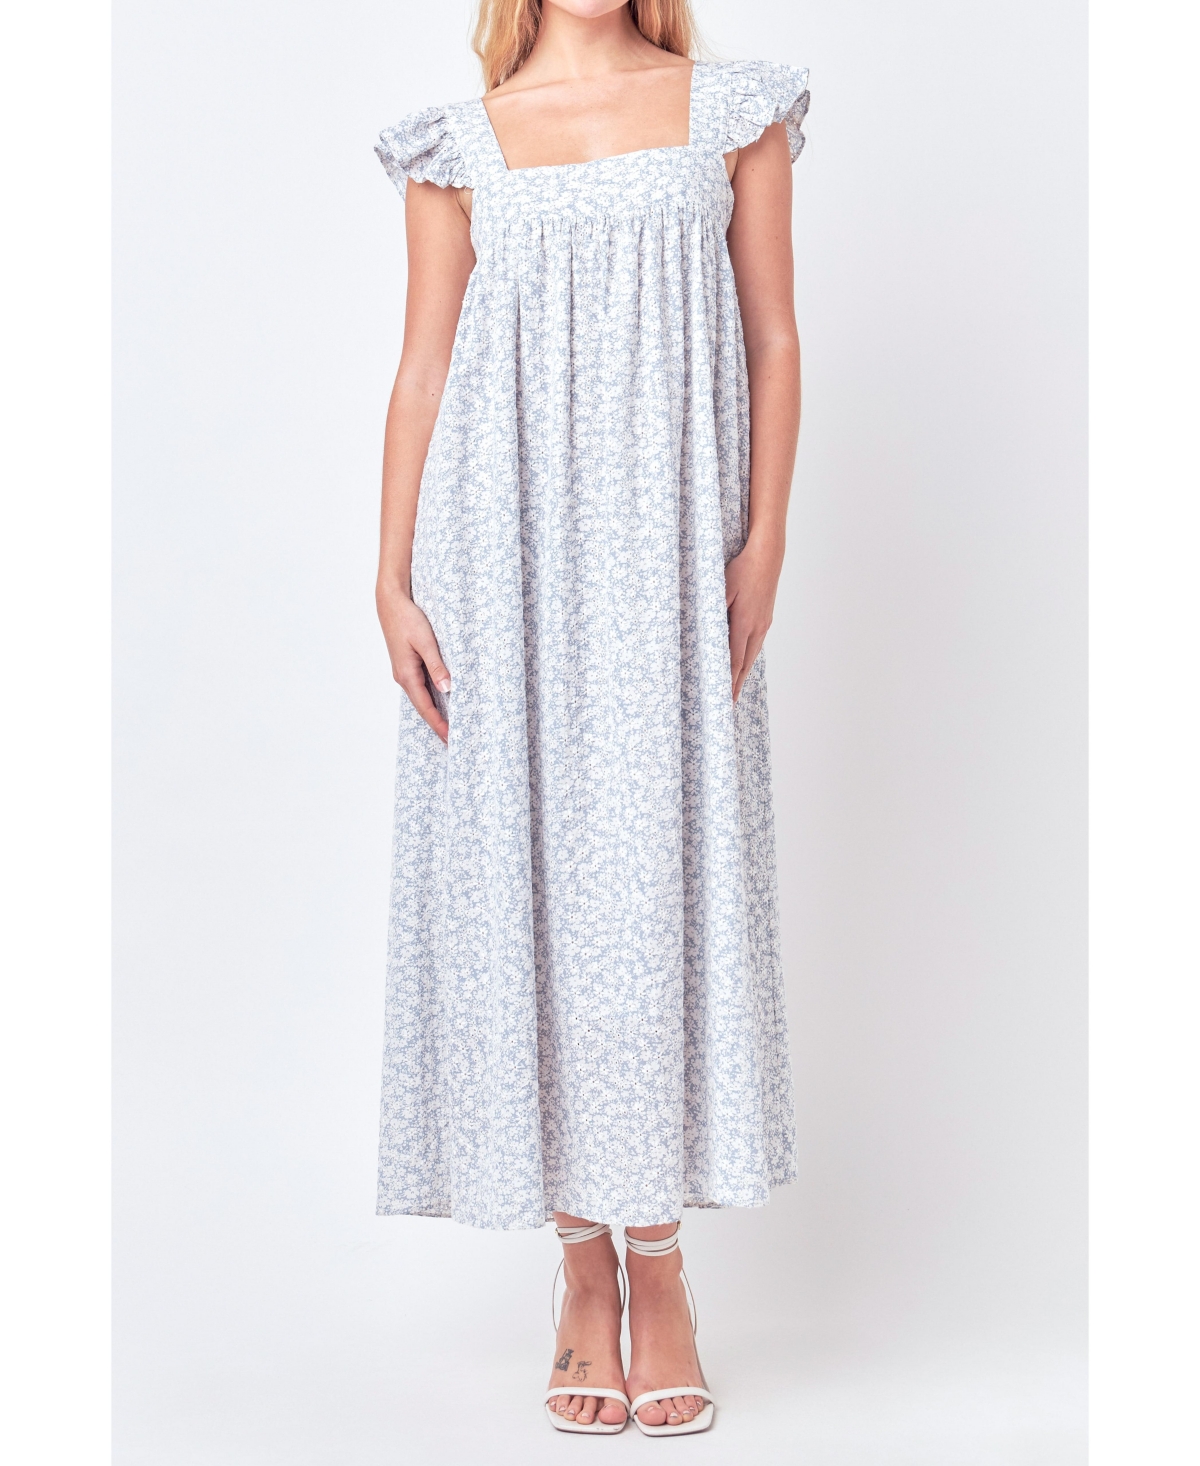 Women's Floral Print with Embroidery Maxi Dress - Blue/white